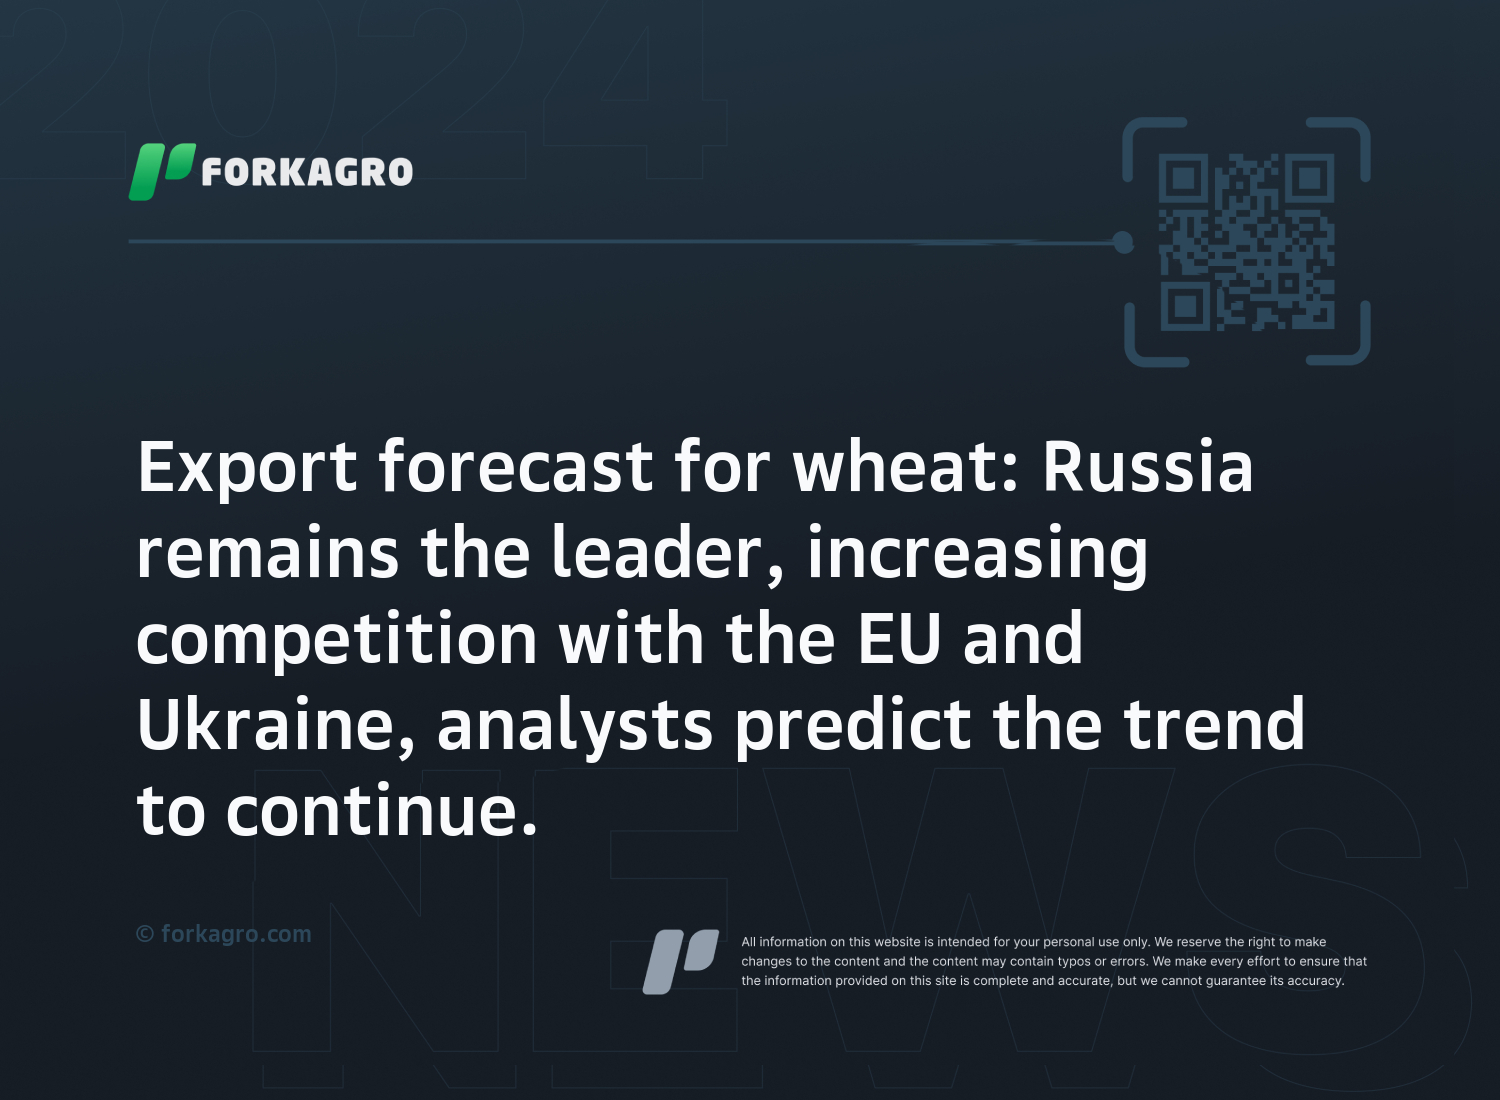 Export forecast for wheat: Russia remains the leader, increasing competition with the EU and Ukraine, analysts predict the trend to continue.